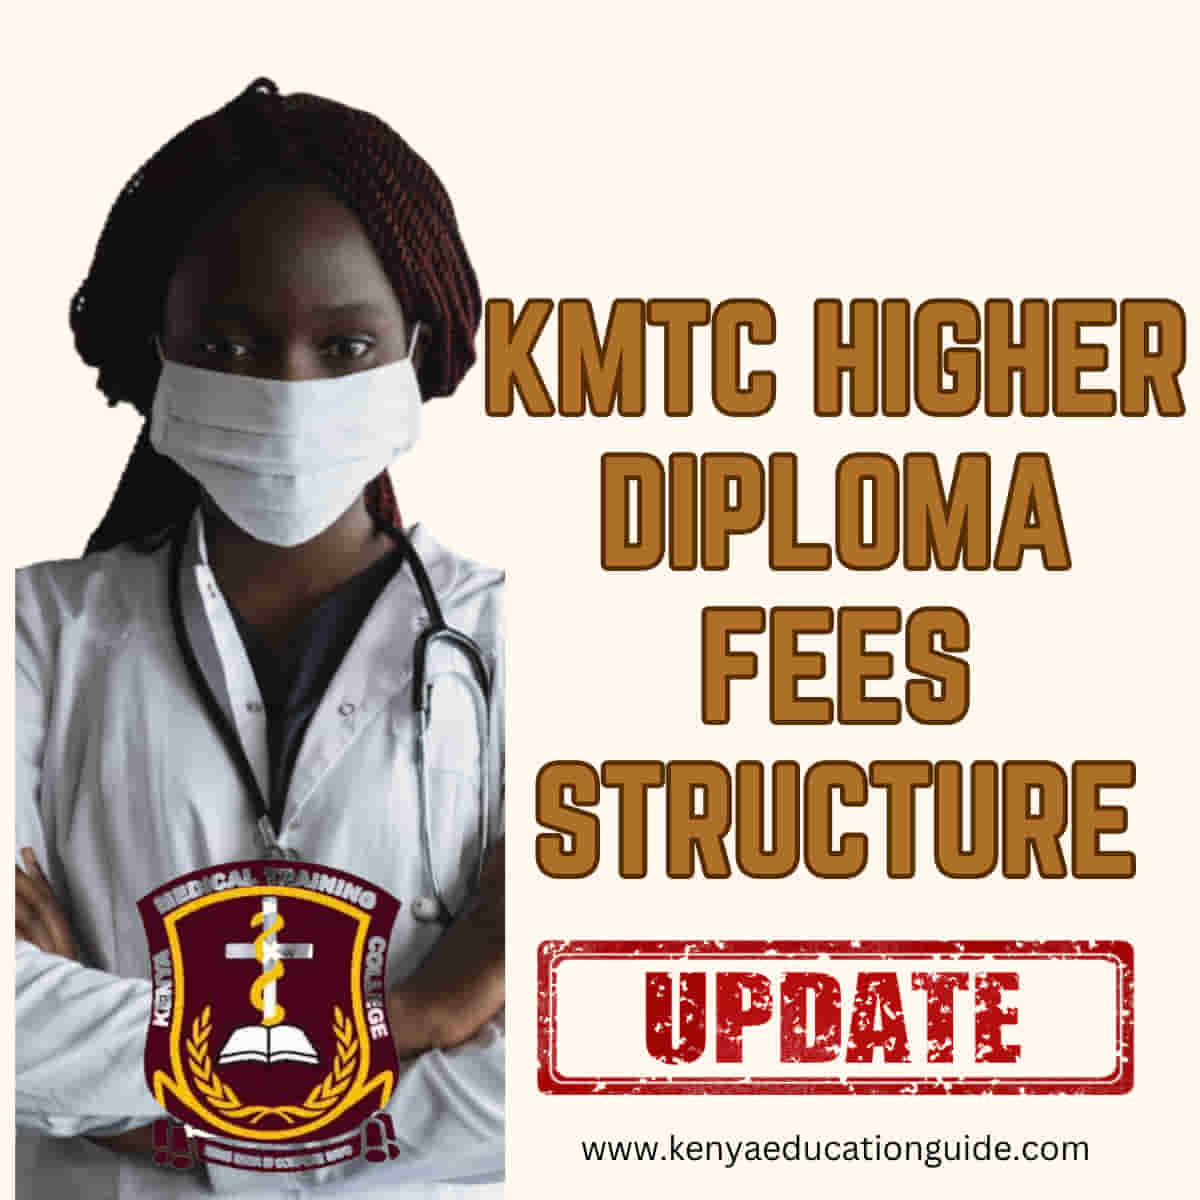 KMTC higher diploma fees structure